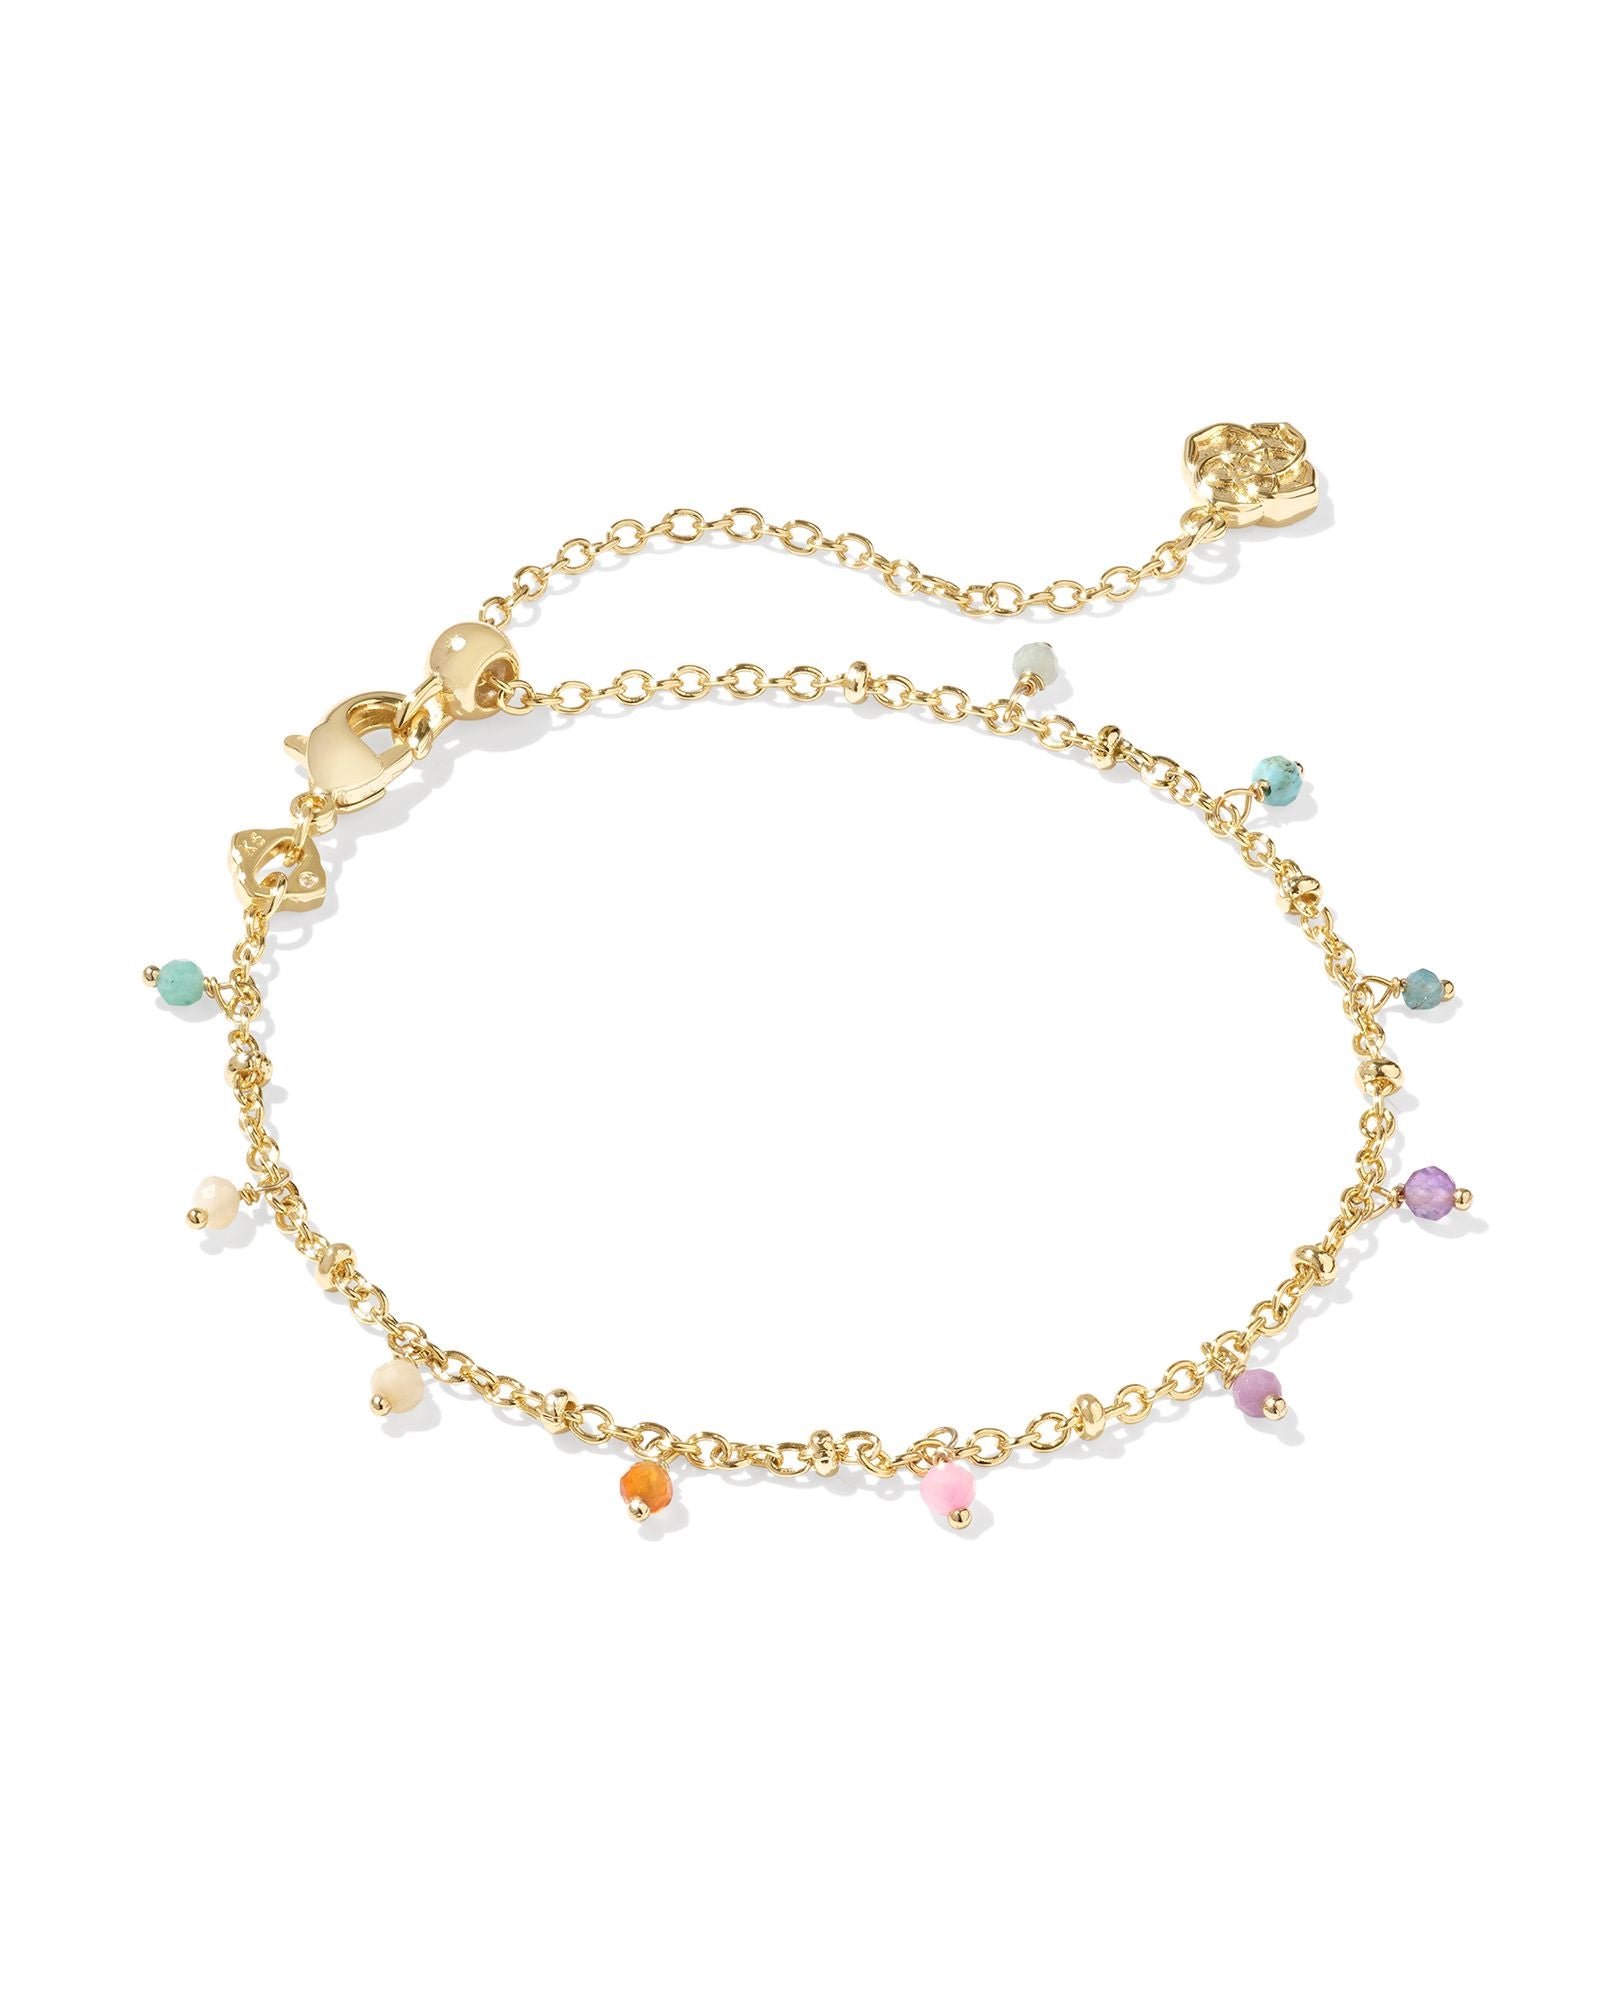 Camry Beaded Delicate Chain Bracelet Gold Pastel Mix